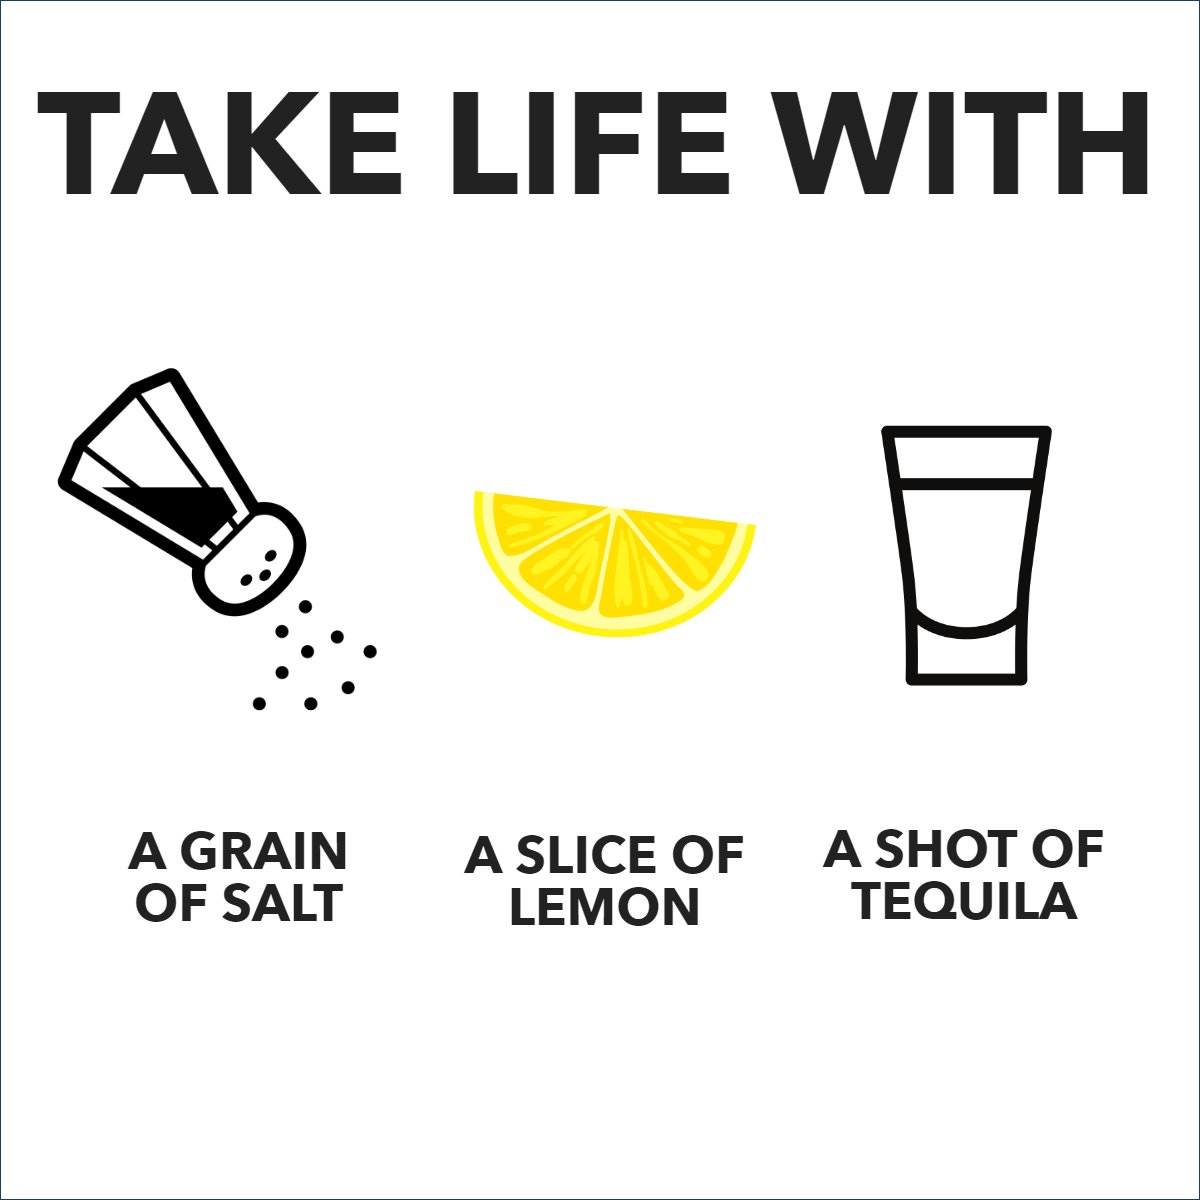 Take life with a grain of salt, a slice of lemon and a shot of tequila... 🧂🍋🥃

#lifeisbetteratthebeach    #tequilashots    #makelifebetter    #lemonslice    #tequilashot    #positive    #positivethinking
#realestate #homebuying #homeselling #homevalue #homevalues